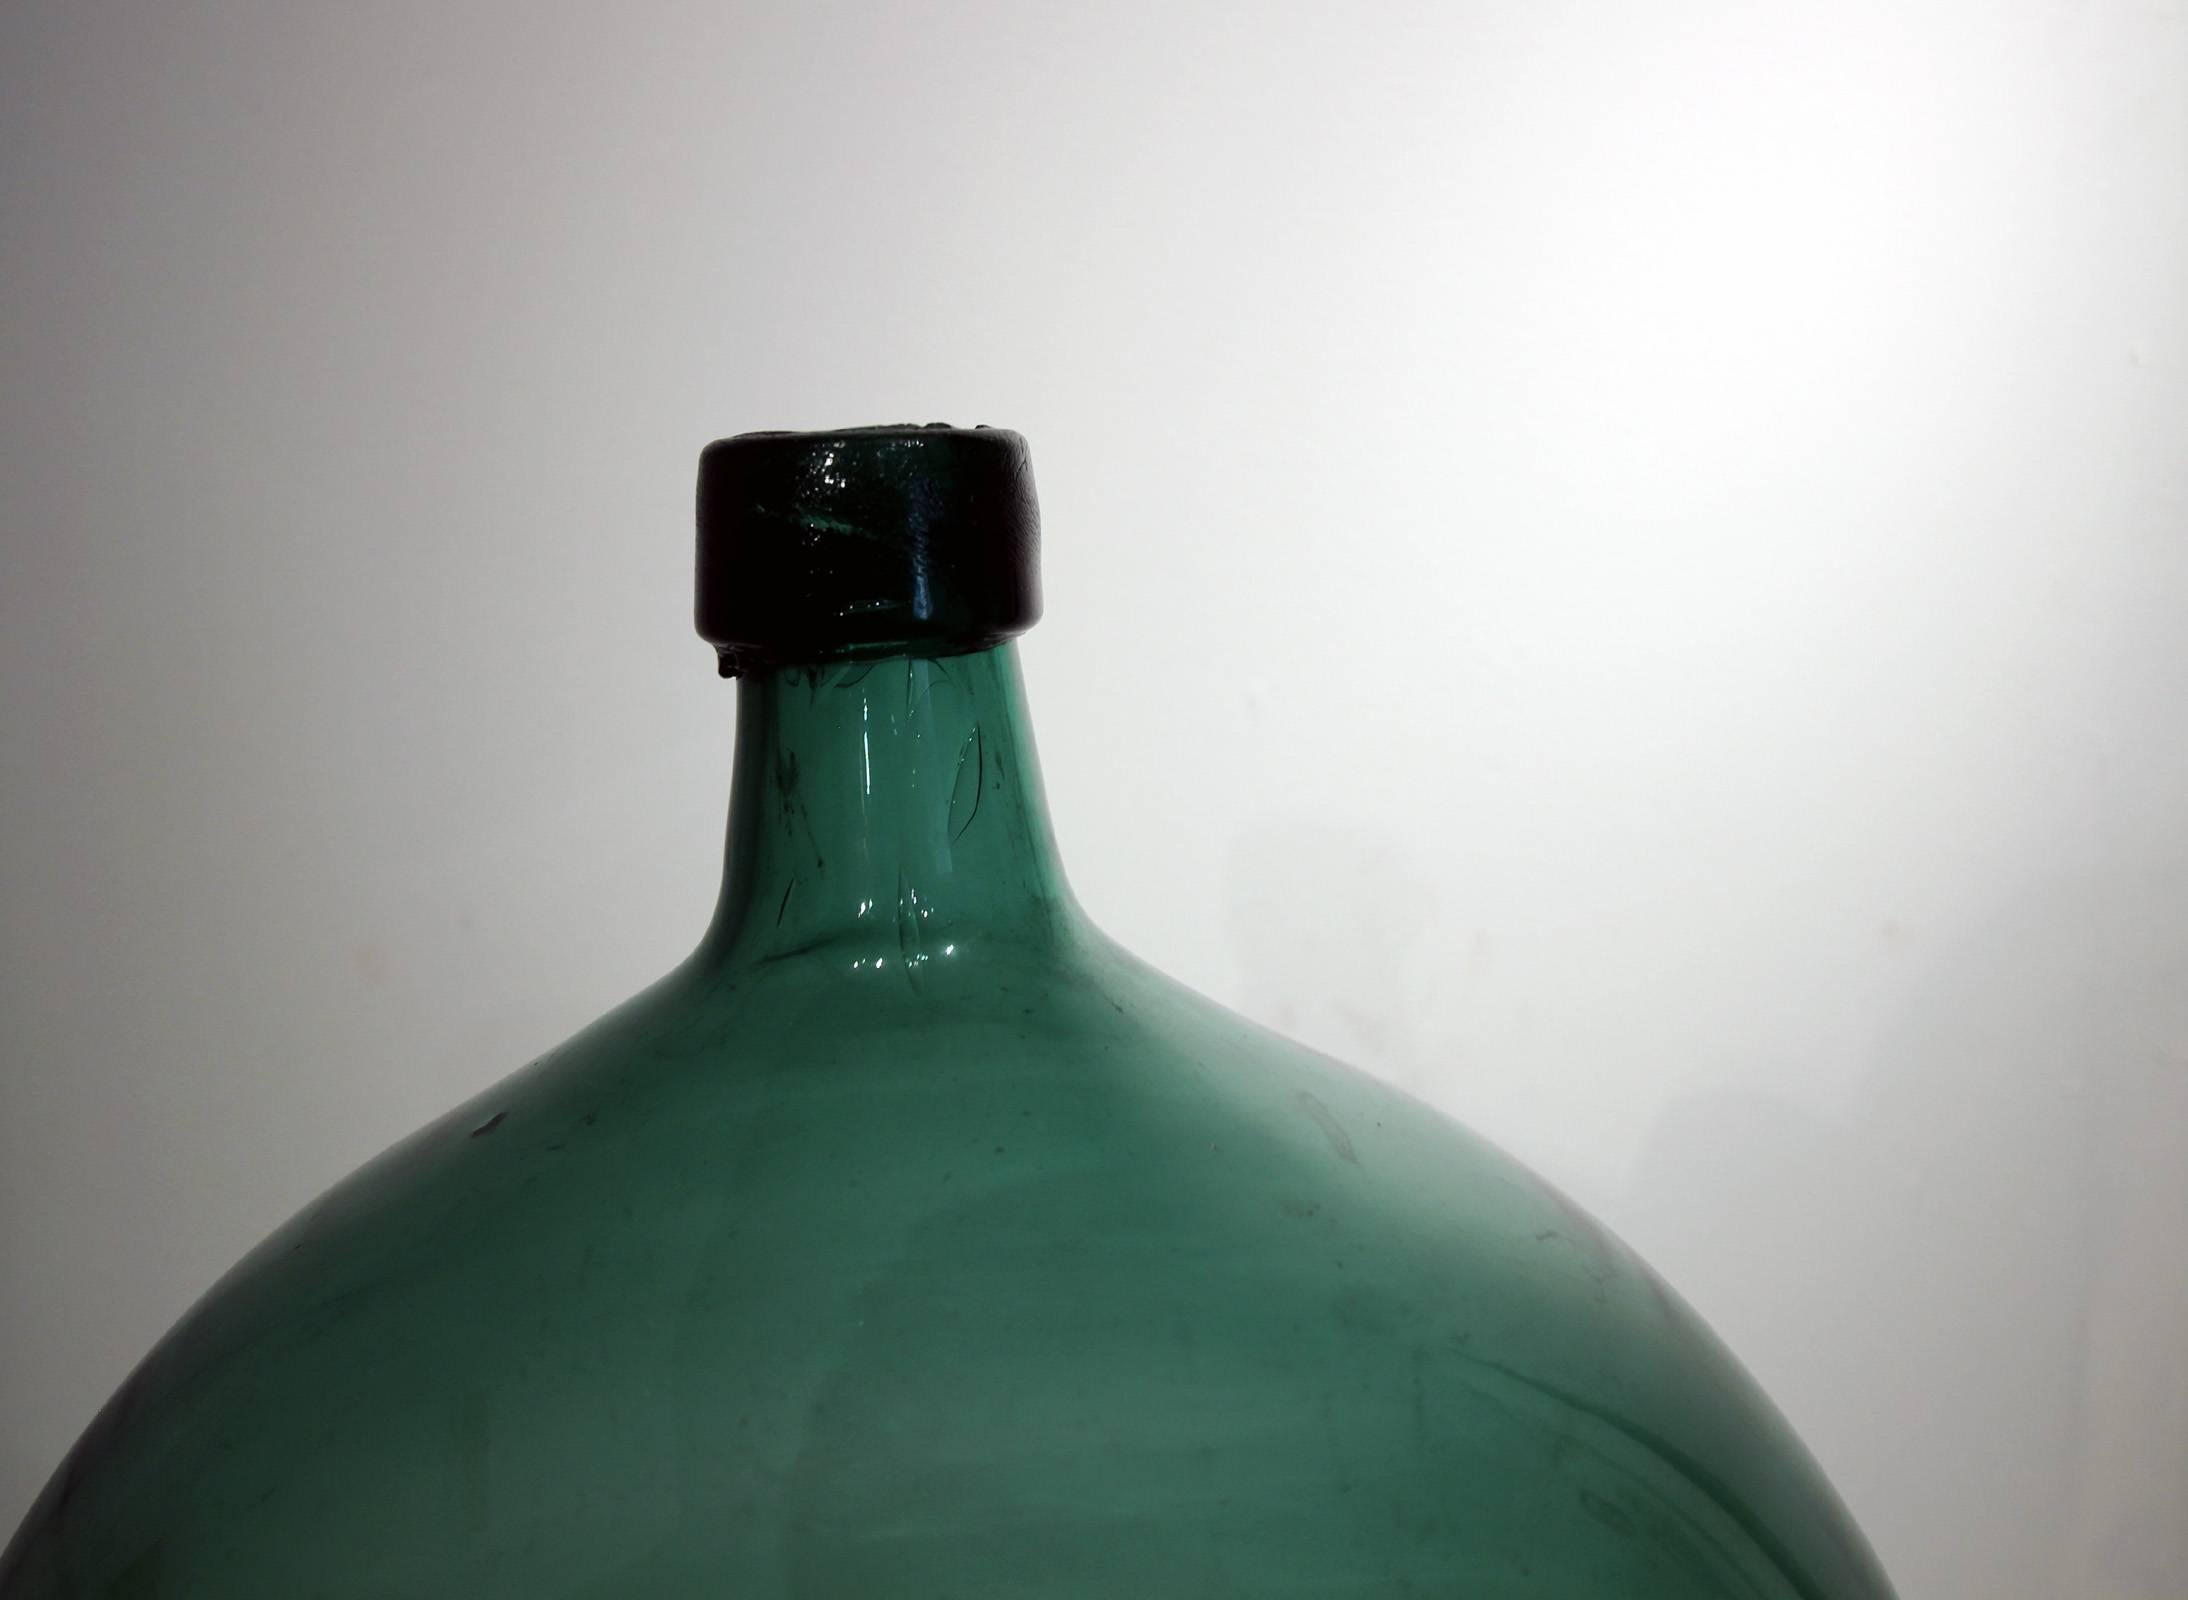 Large and fine, deep green blown glass demijohn bottle; American, late 19th century. Excellent condition. Unusual rich coloration and slightly rounded form.